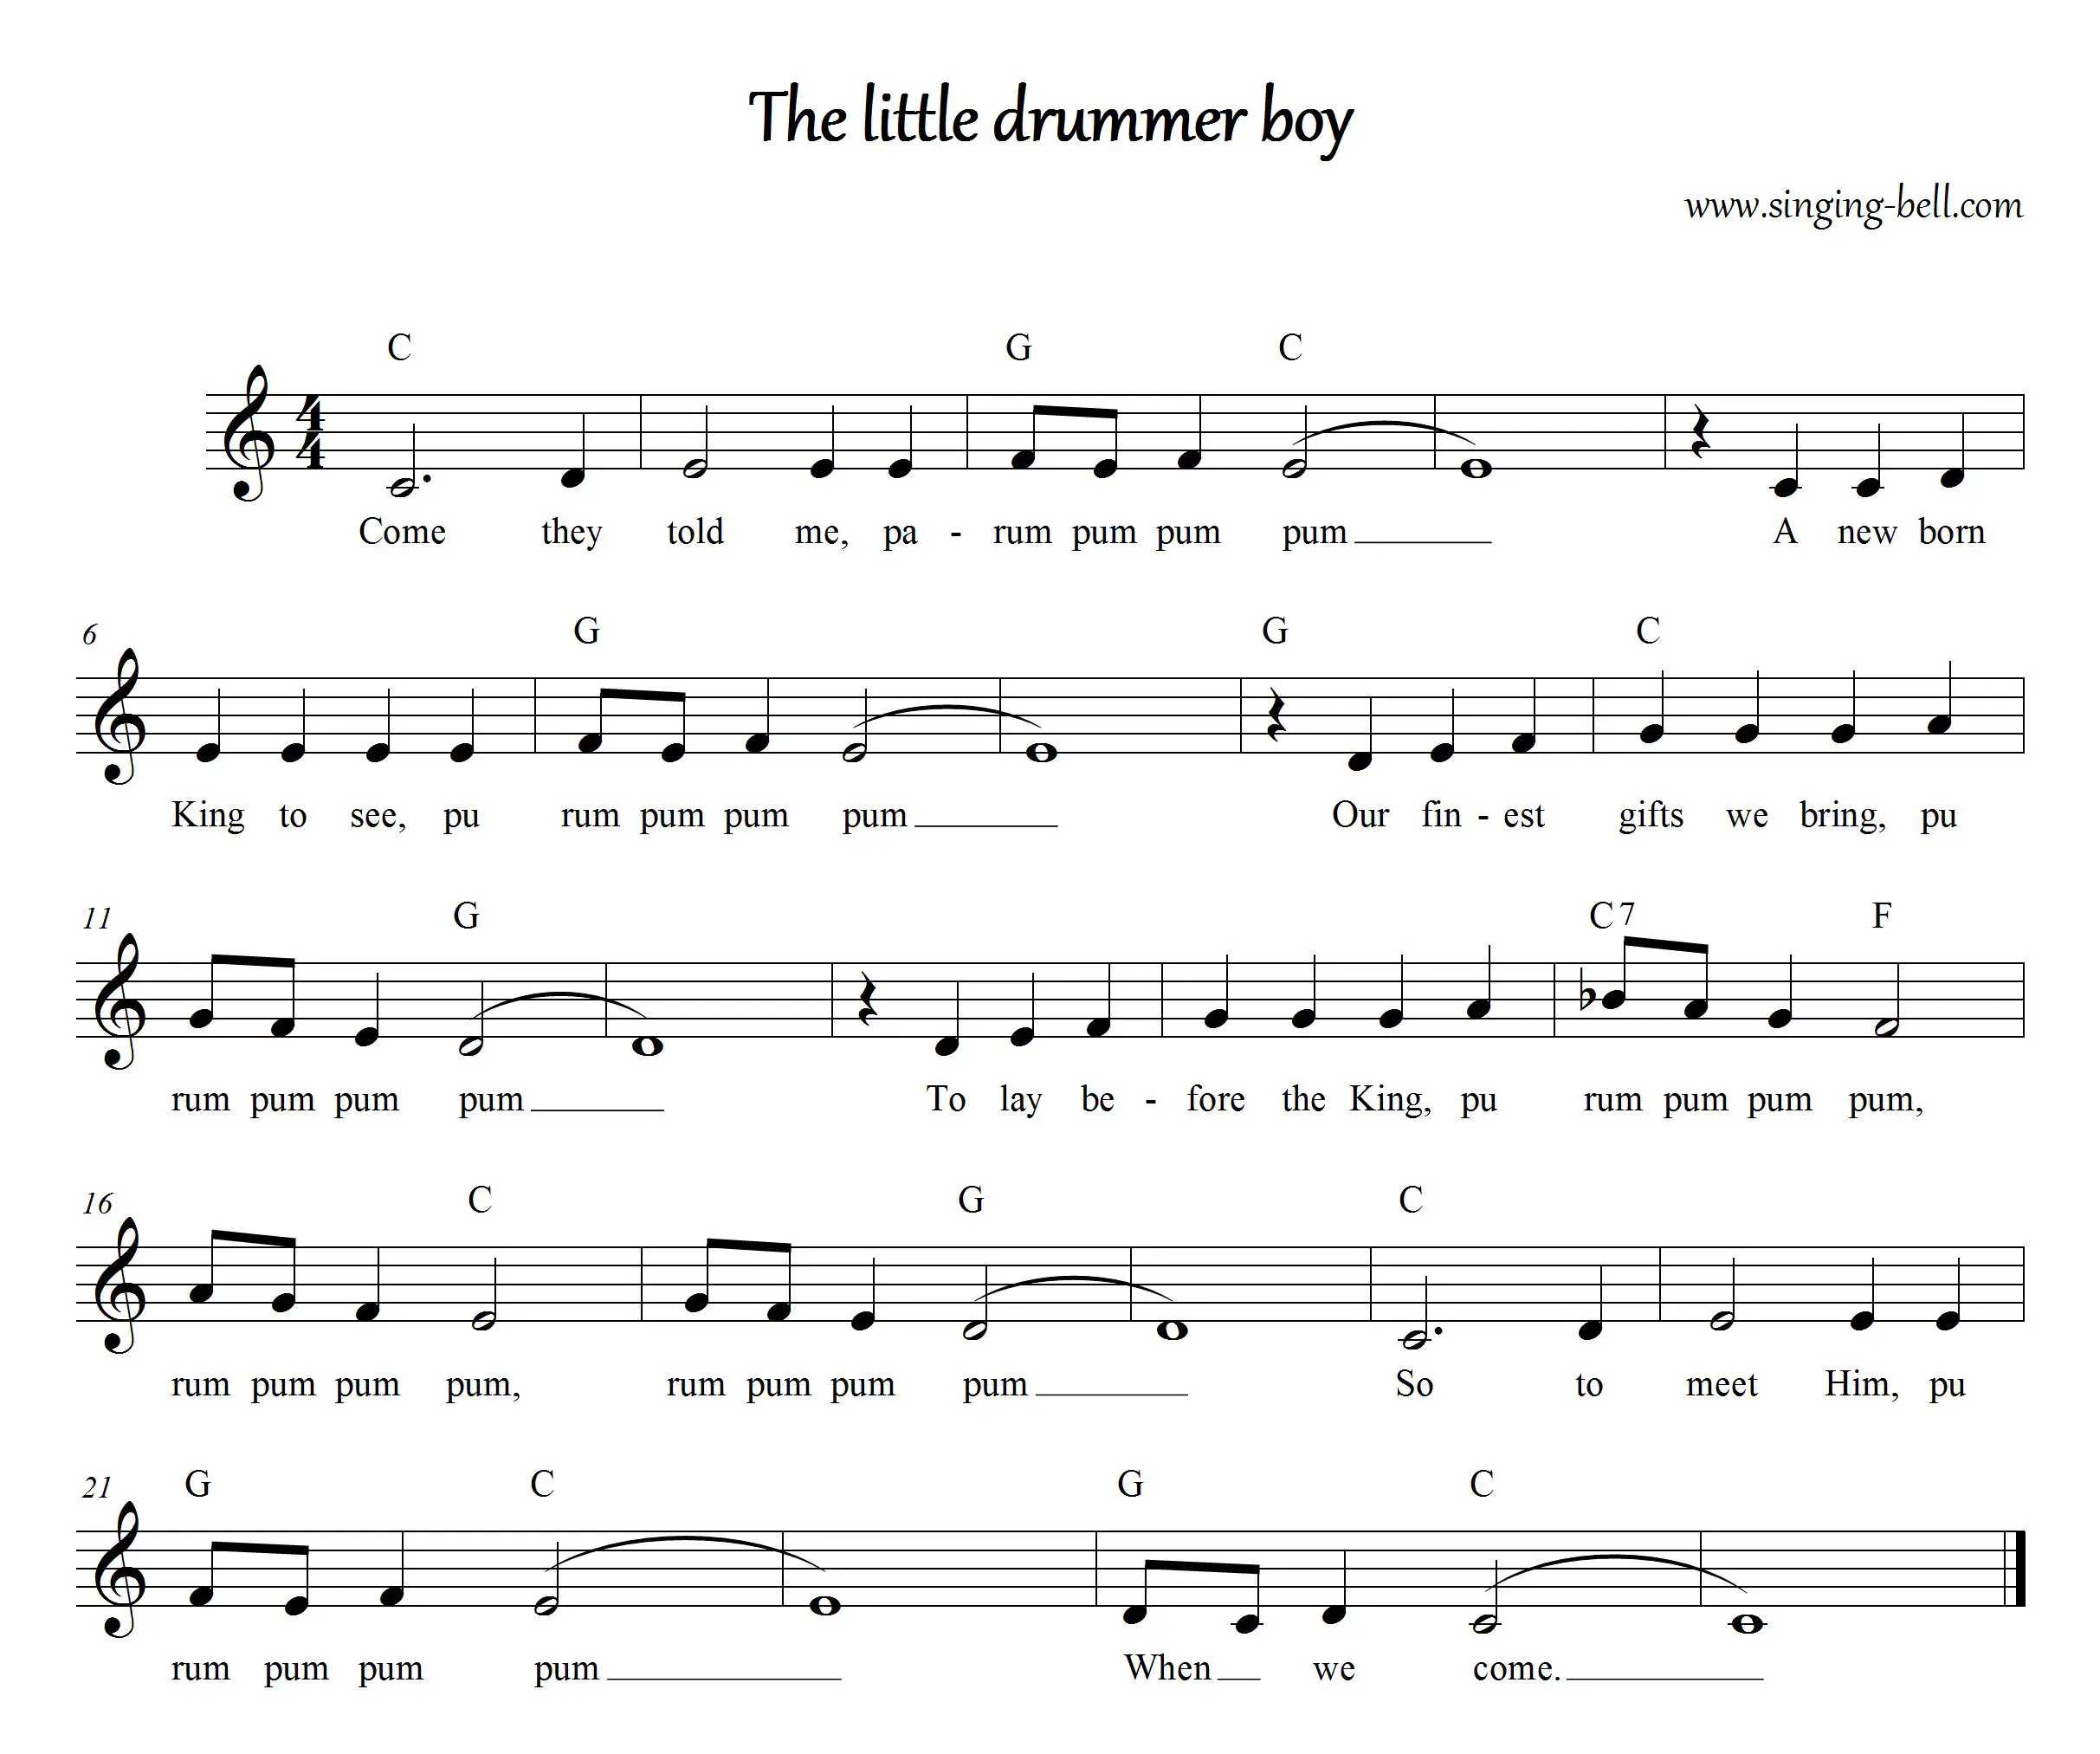 Free Christmas Carols > the Little Drummer Boy free mp3 audio song